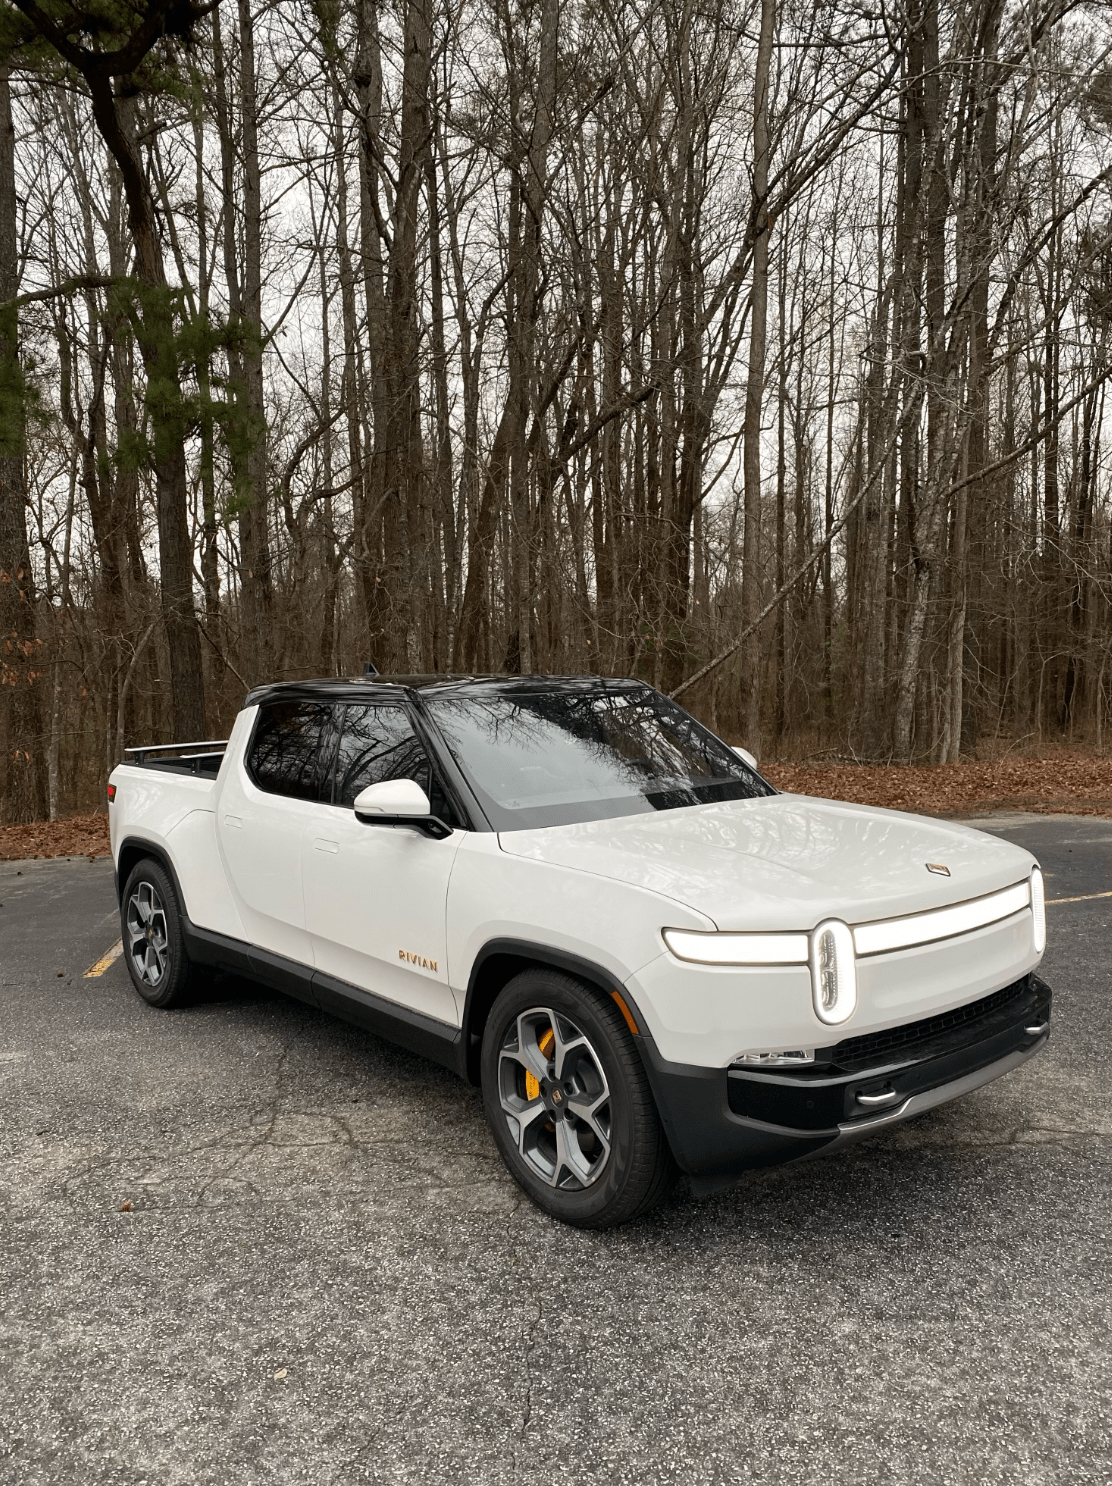 Rivian Roof After Full-min